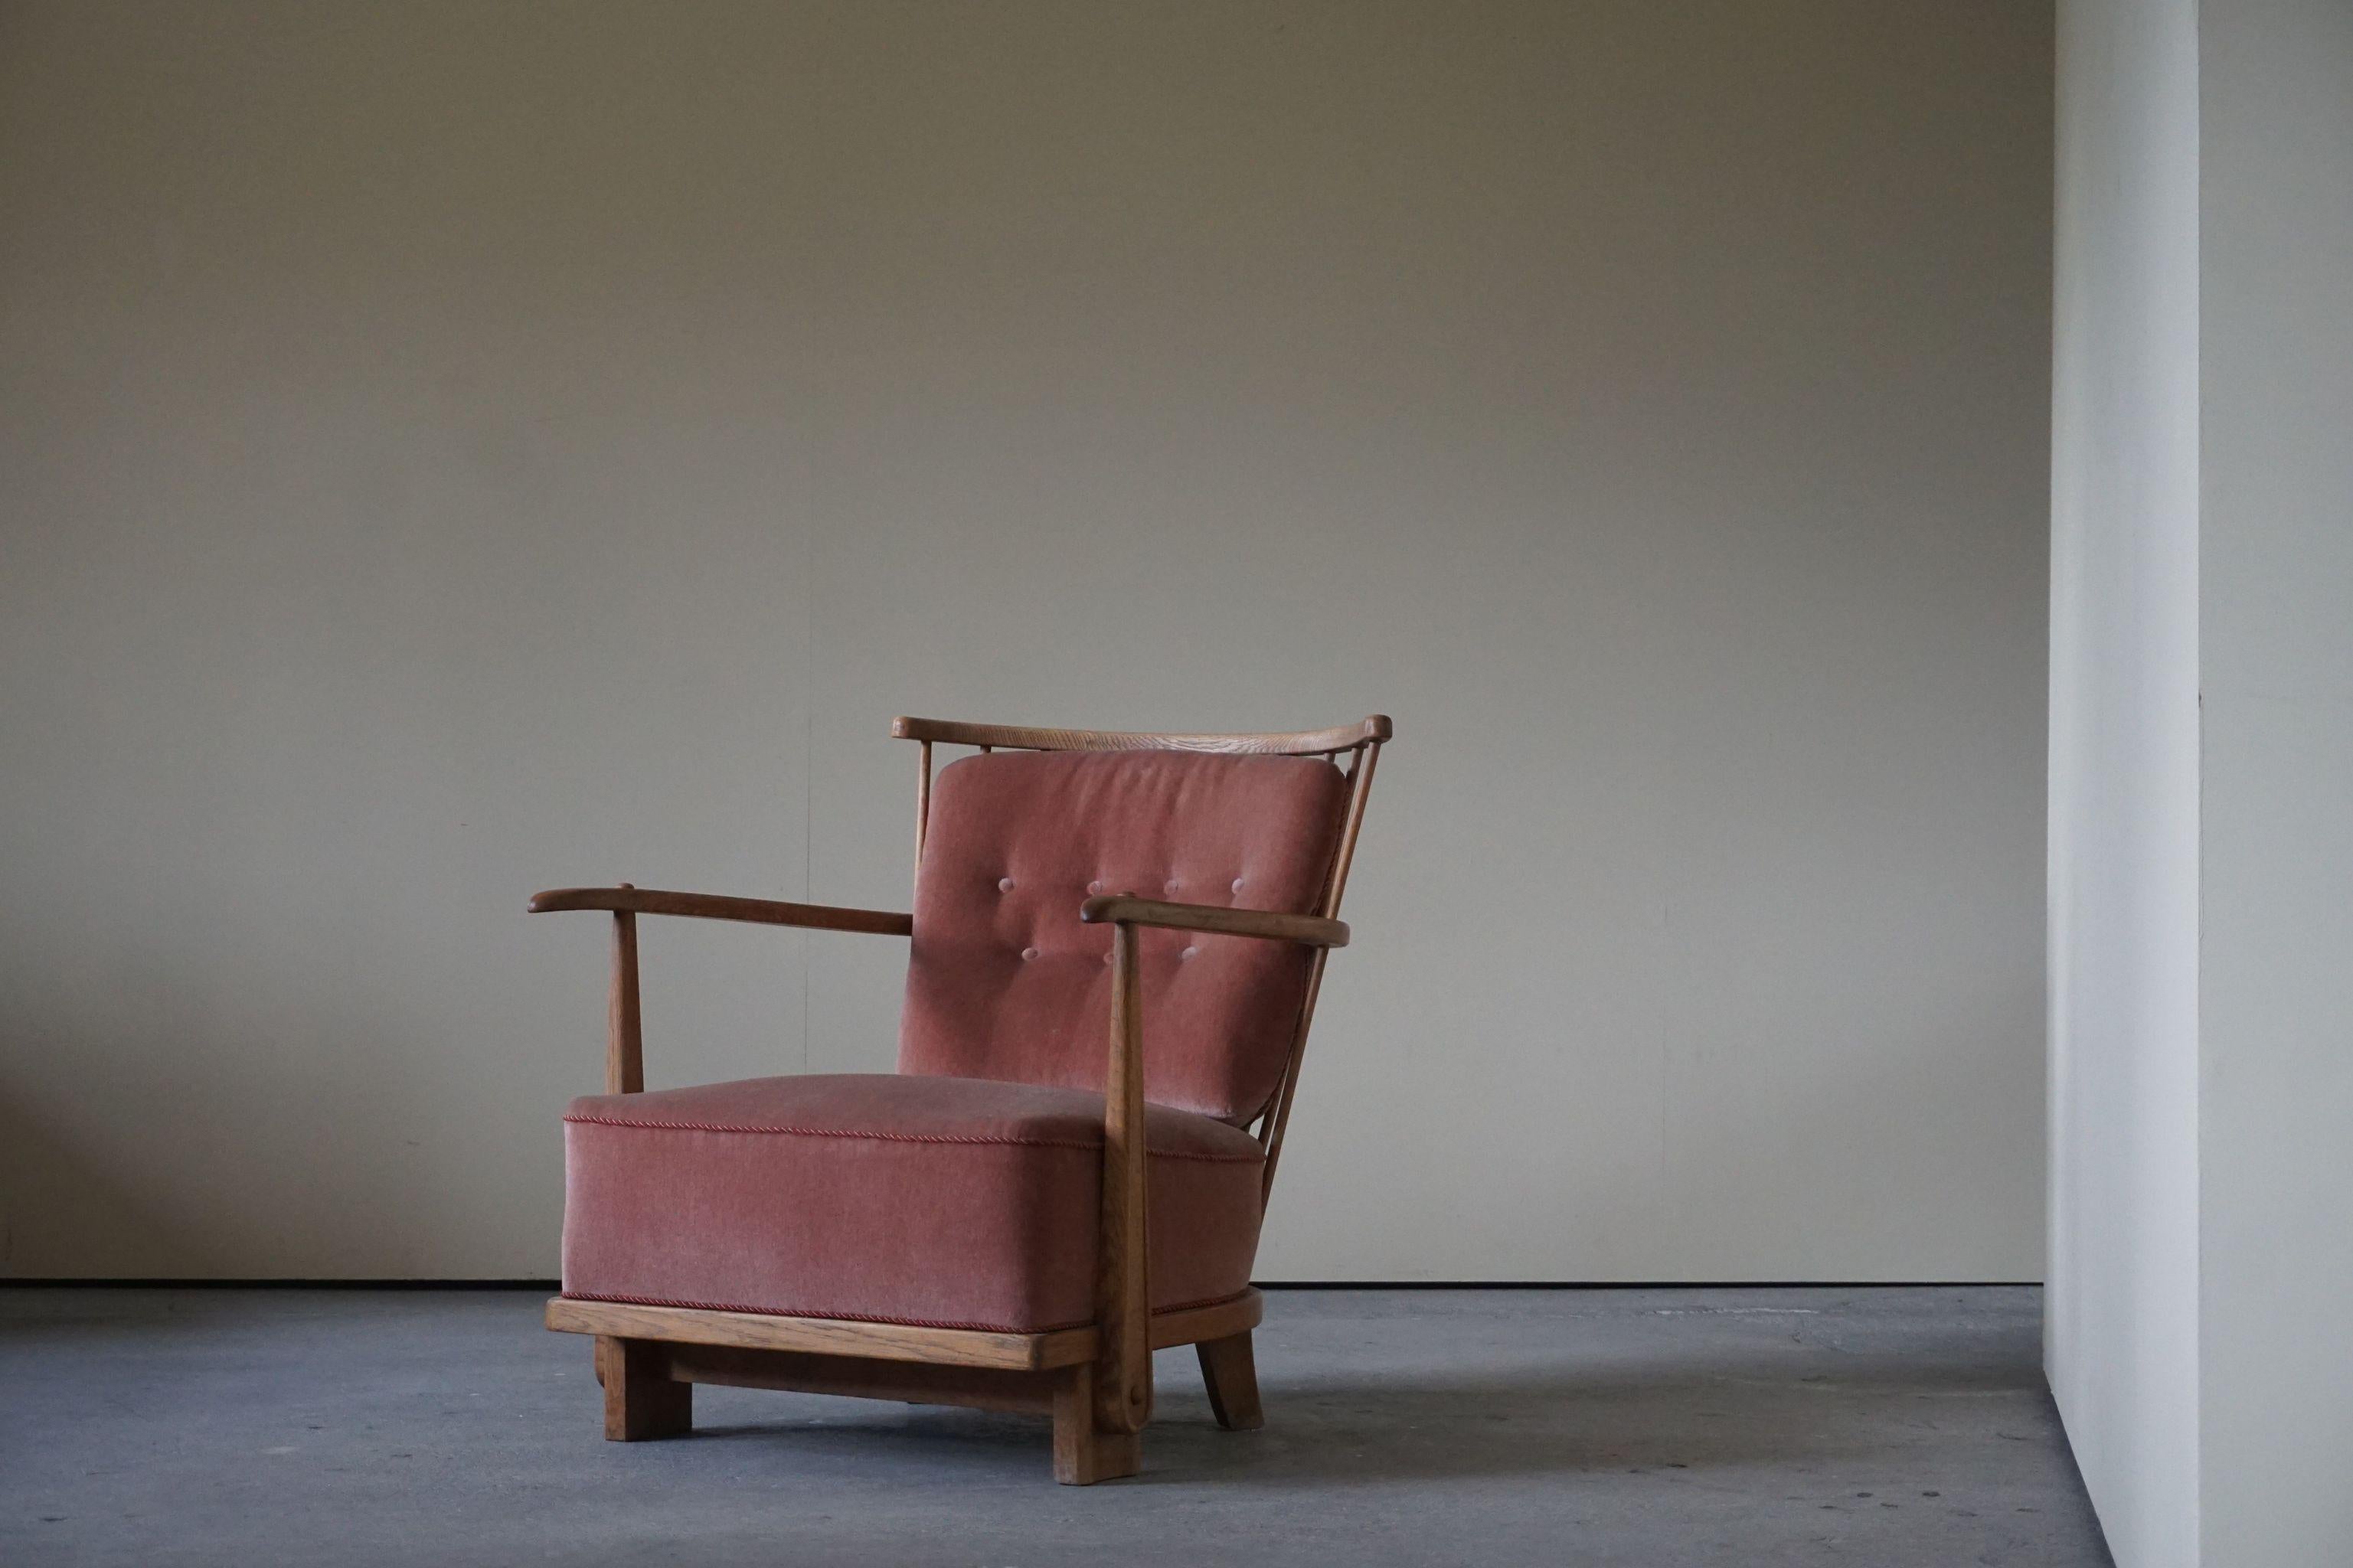 Rare easy chair in oak, model 1590 made by Fritz Hansen, Denmark in the 1940s. The easy chair is first seen in Fritz Hansen's production catalog in 1942.
A very sculptural piece. Great condition still with it's original upholstery in pink velvet.